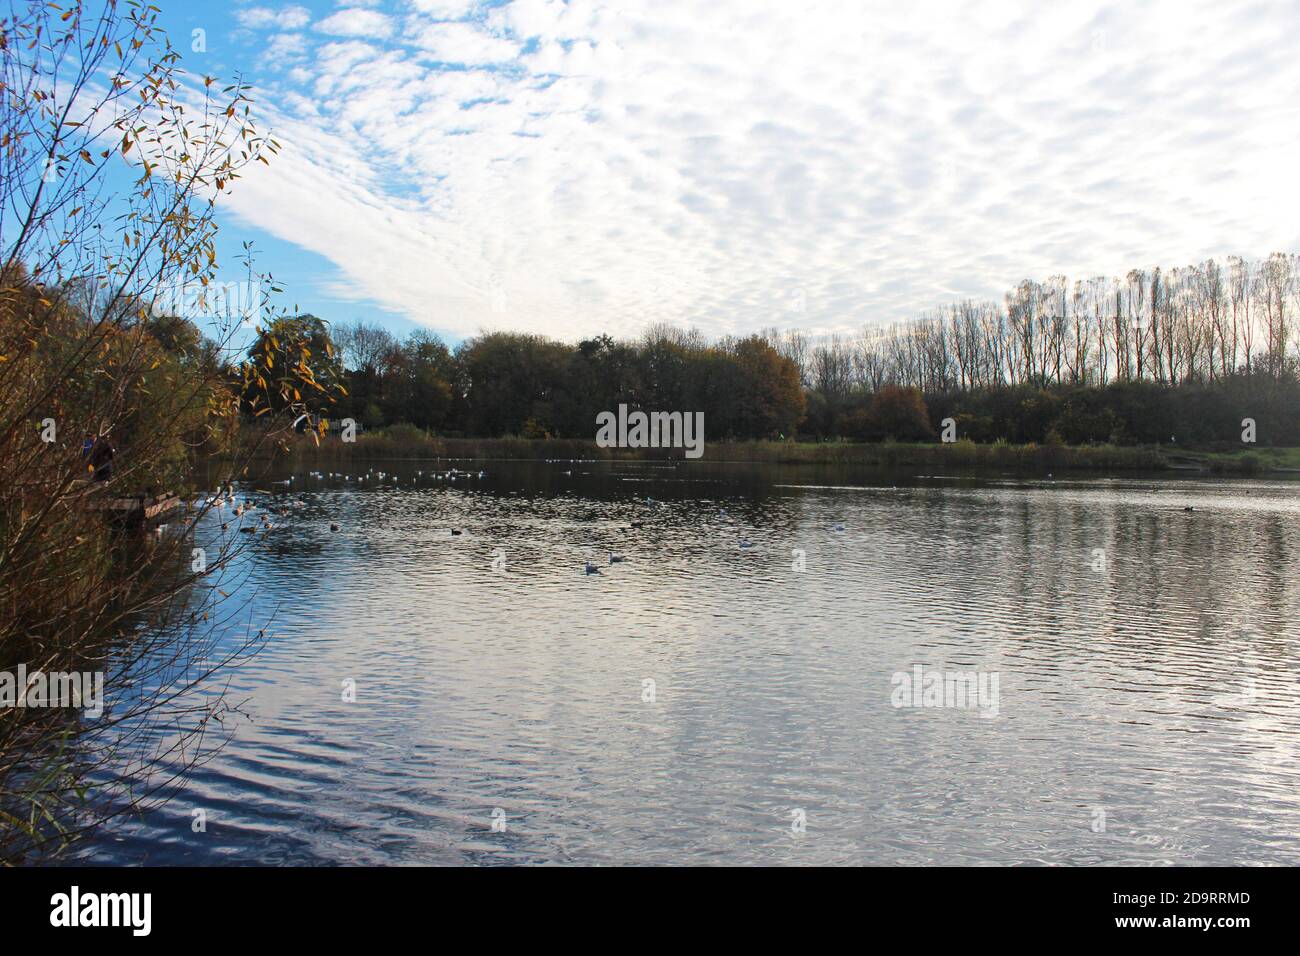 Beautiful scenery of Chorlton water park in England, big calm lake with birds, patchy clouds, bushes and trees on the banks Stock Photo